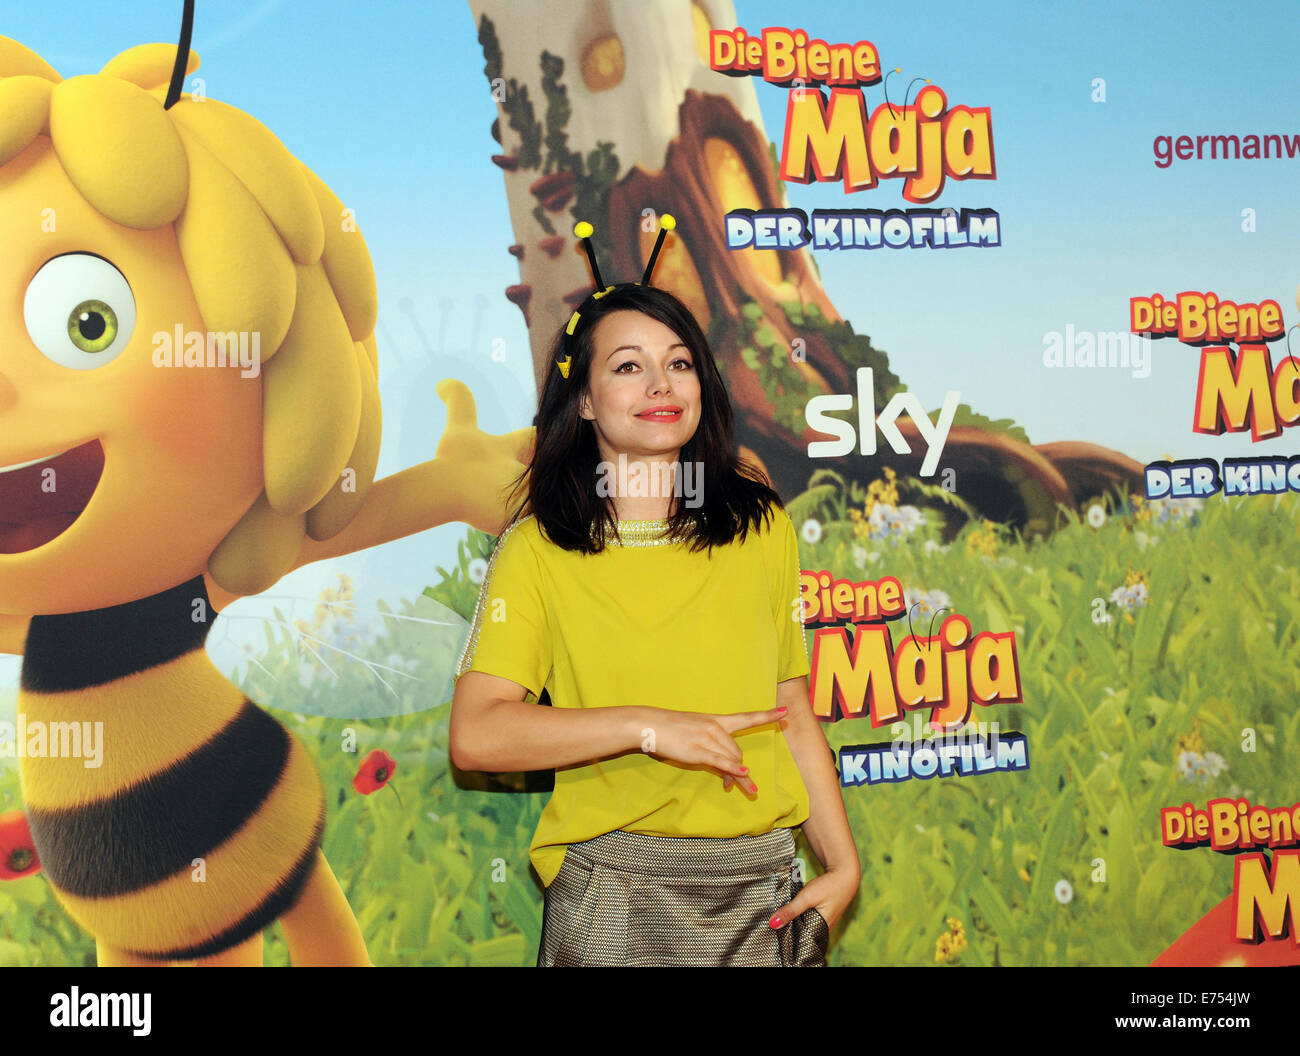 Munich, Germany. 07th Sep, 2014. Voice and movie actress Cosma Shiva Hagen  (voice of 'Frau Kassandra') at the world premiere of the movie 'Die Biene  Maja' (engl. 'The bee Maja') in Munich,